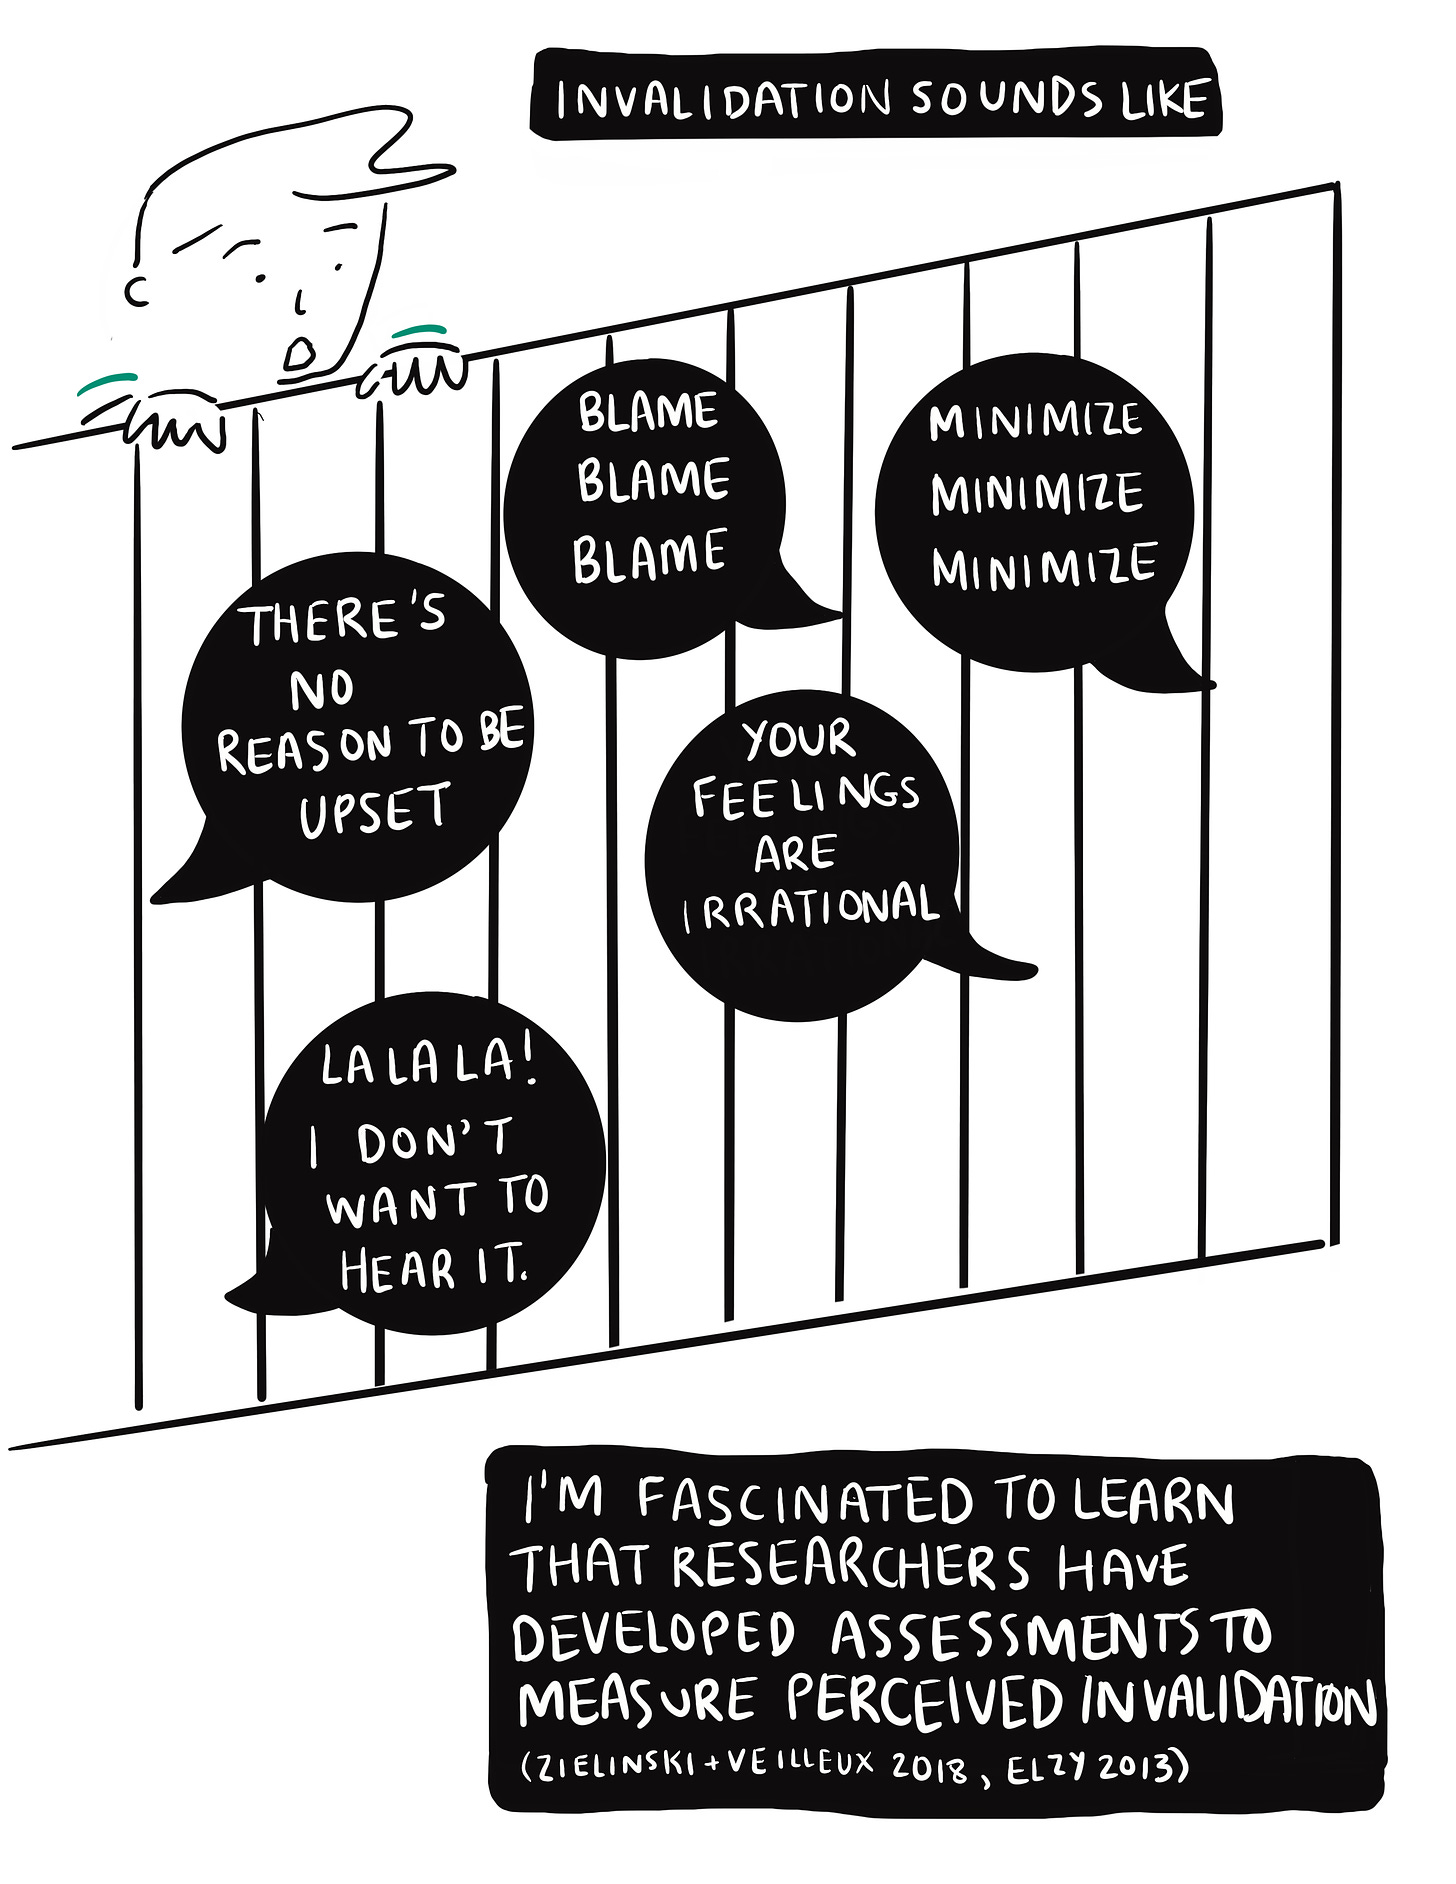 Cartoonist staring over a fence at speech bubbles. Narration: invalidation sounds like. “There’s no reason to be upset.” “Blame blame blame” “Minimize minimize minimize” “your feelings are irrational” “la la la I don’t want to hear it.” Narration: I’m fascinated to learn that researchers have developed assessments to measure perceived invalidation (Zielinski & Veilleux 2018; Elzy 2029).